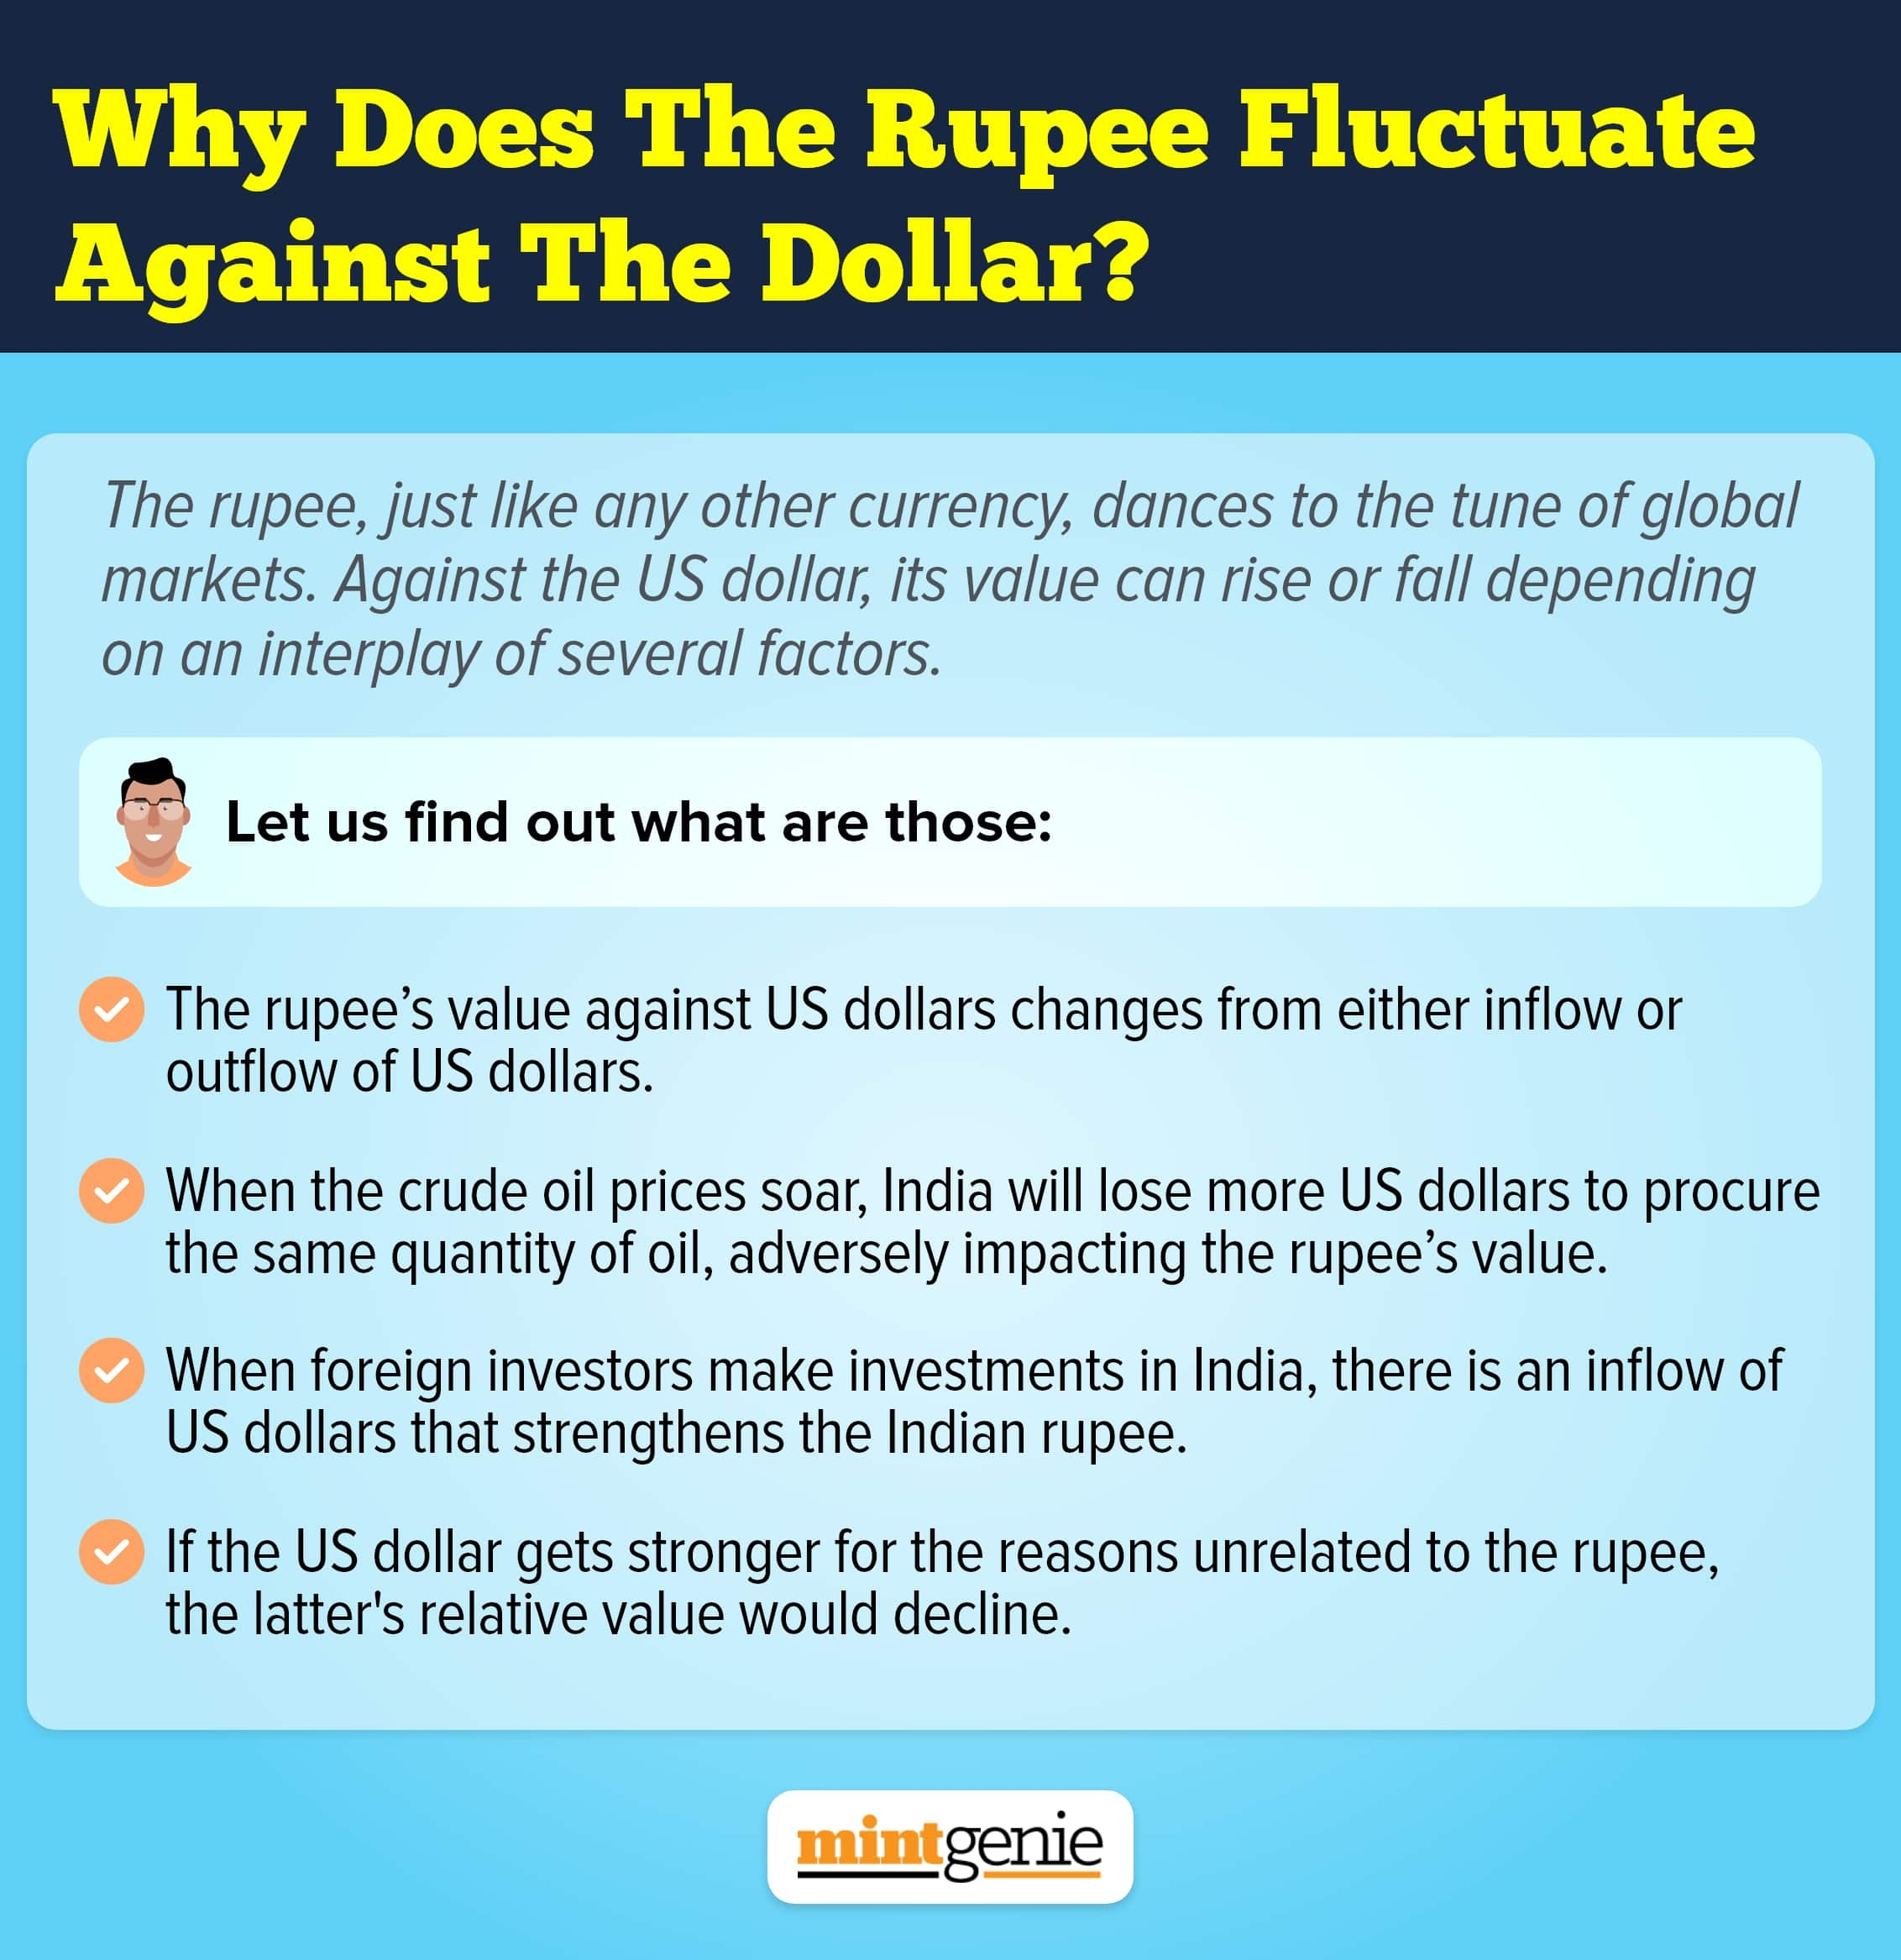 We explain here why does the rupee fluctuate against the dollar.